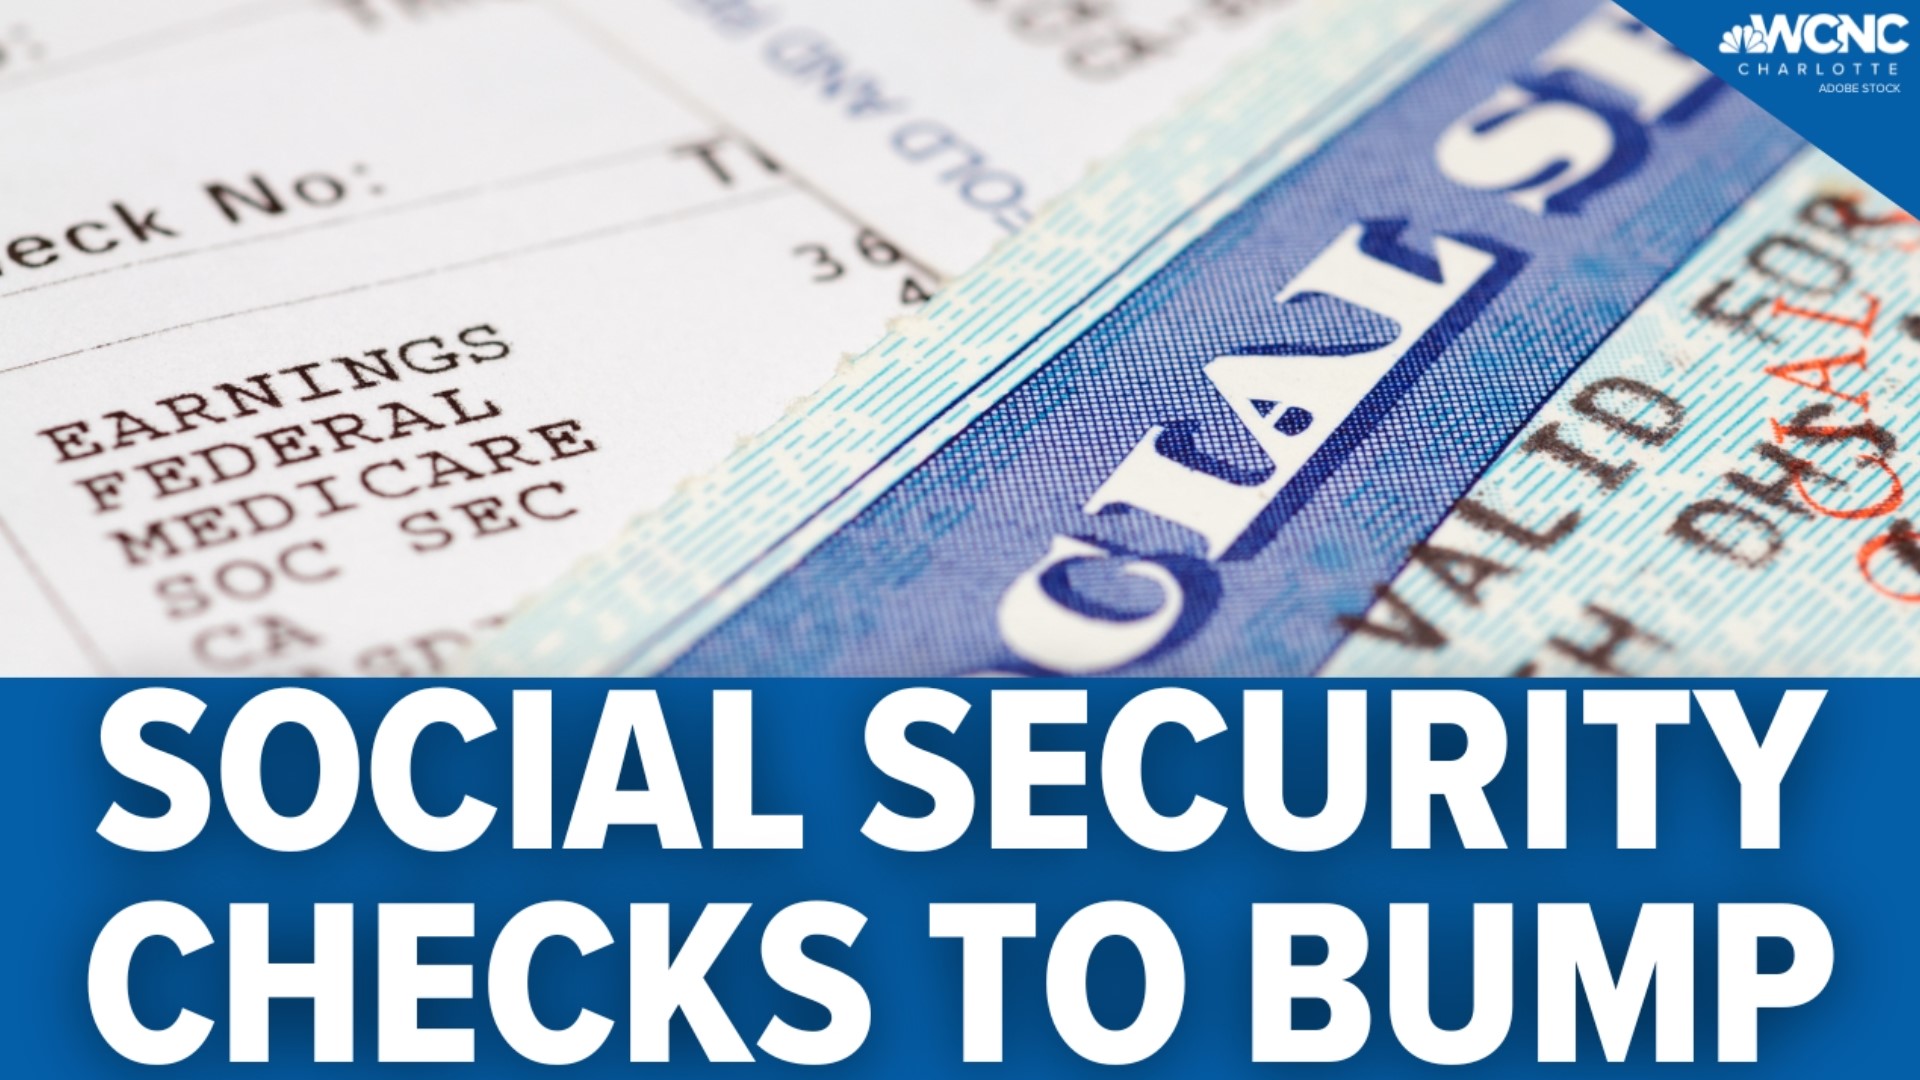 Due to inflation, some people may see a nearly 9% increase in their Social Security checks.